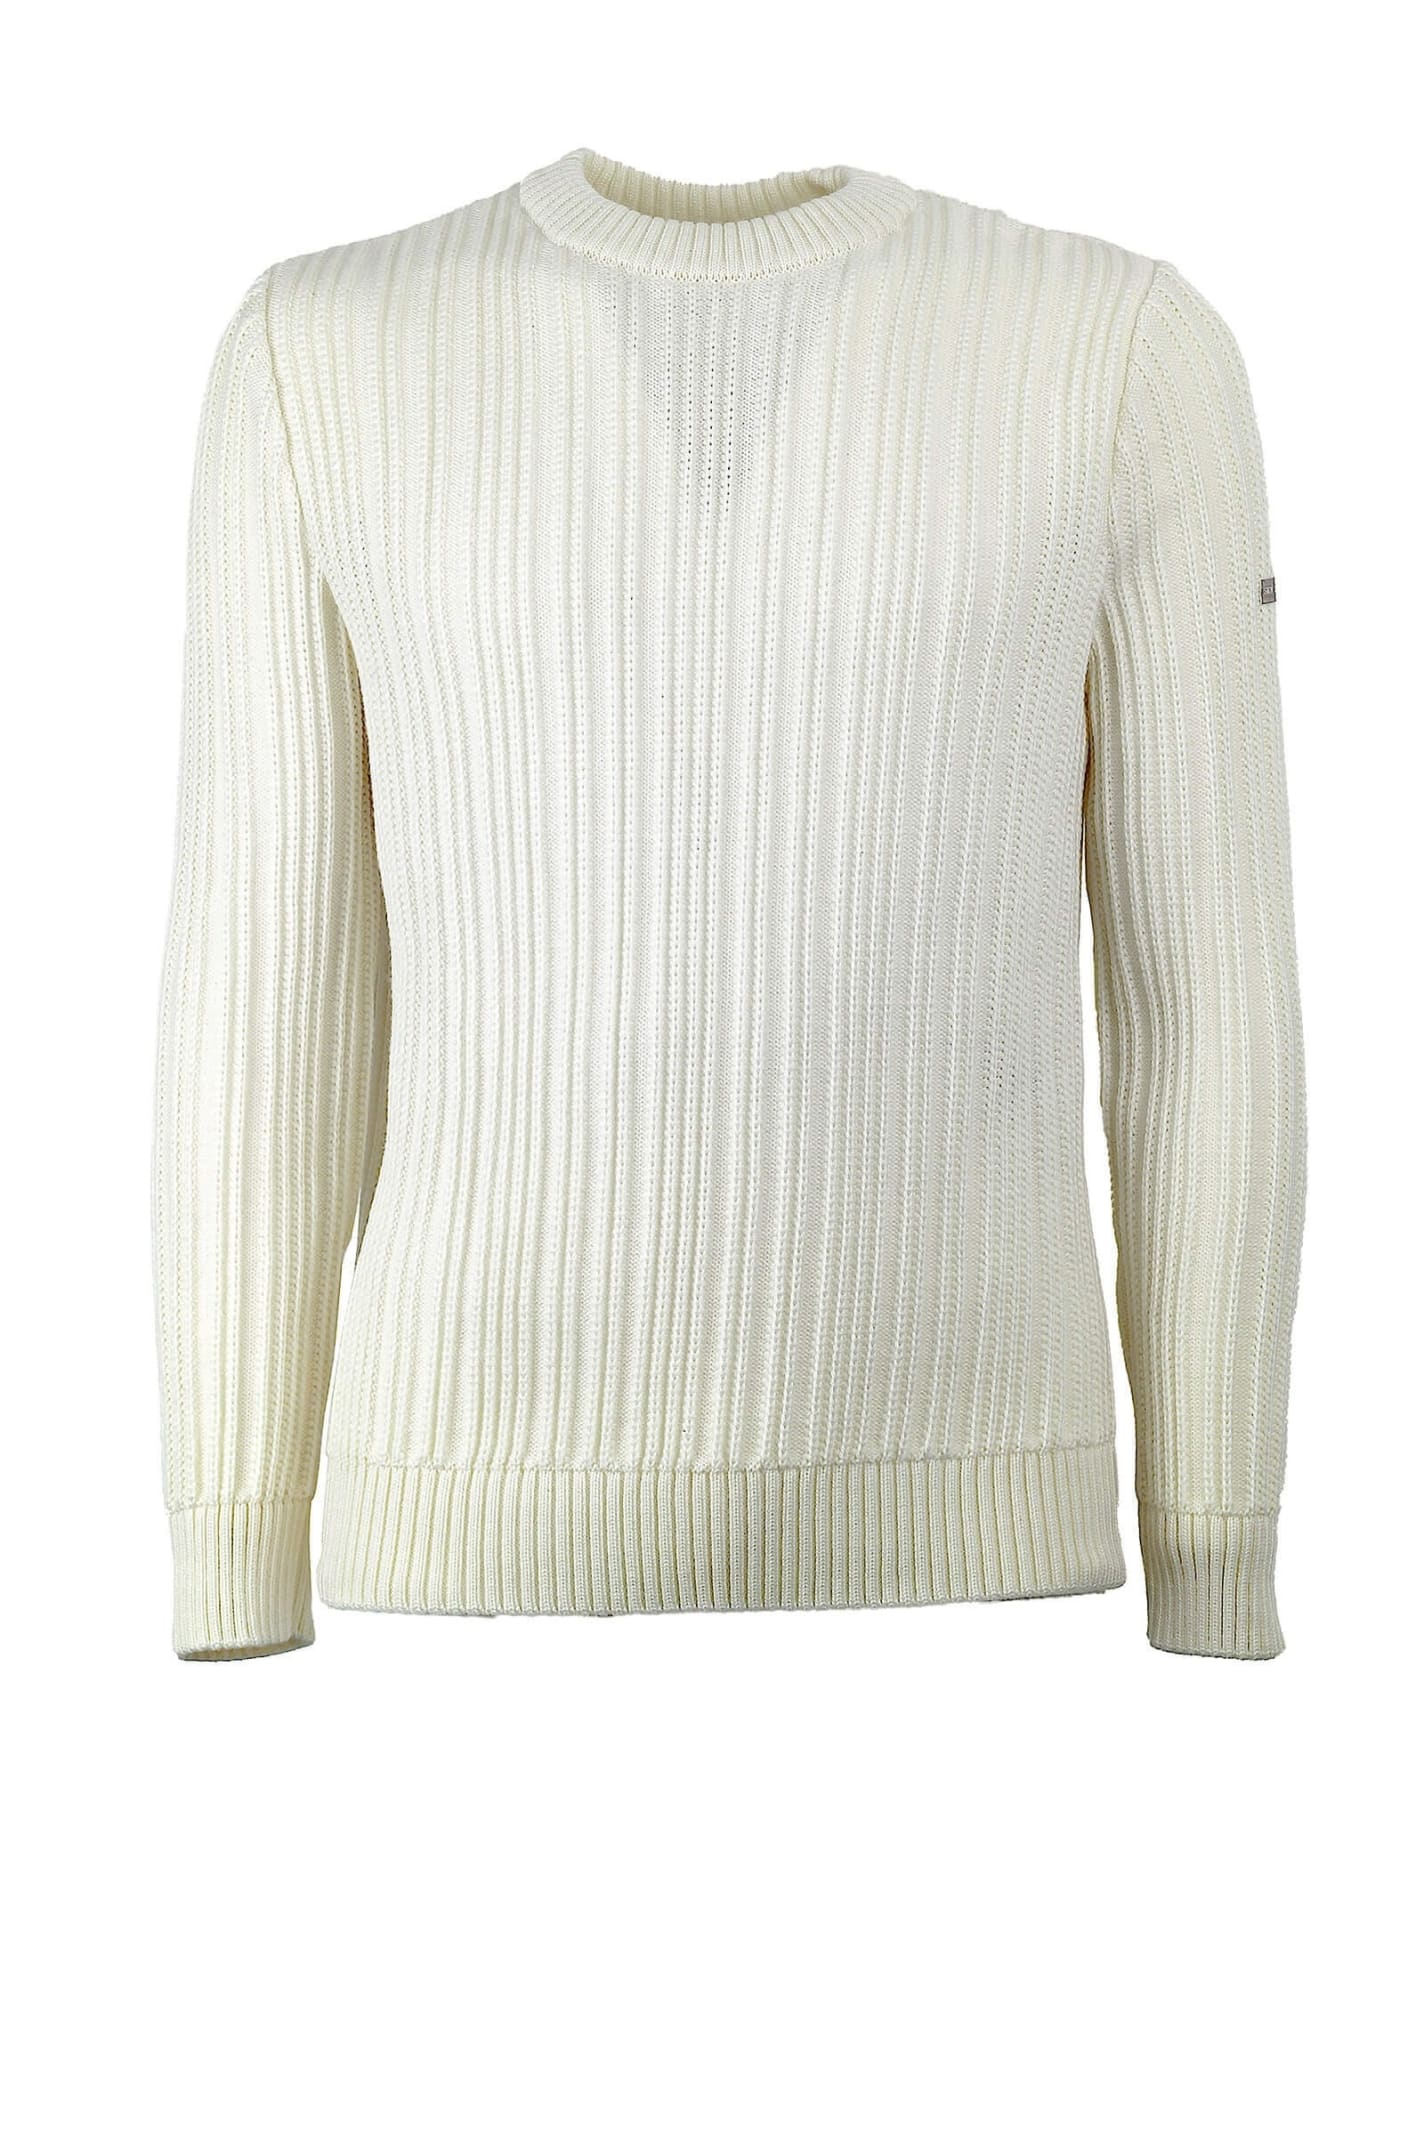 Saint James Mouthiers White Sweater